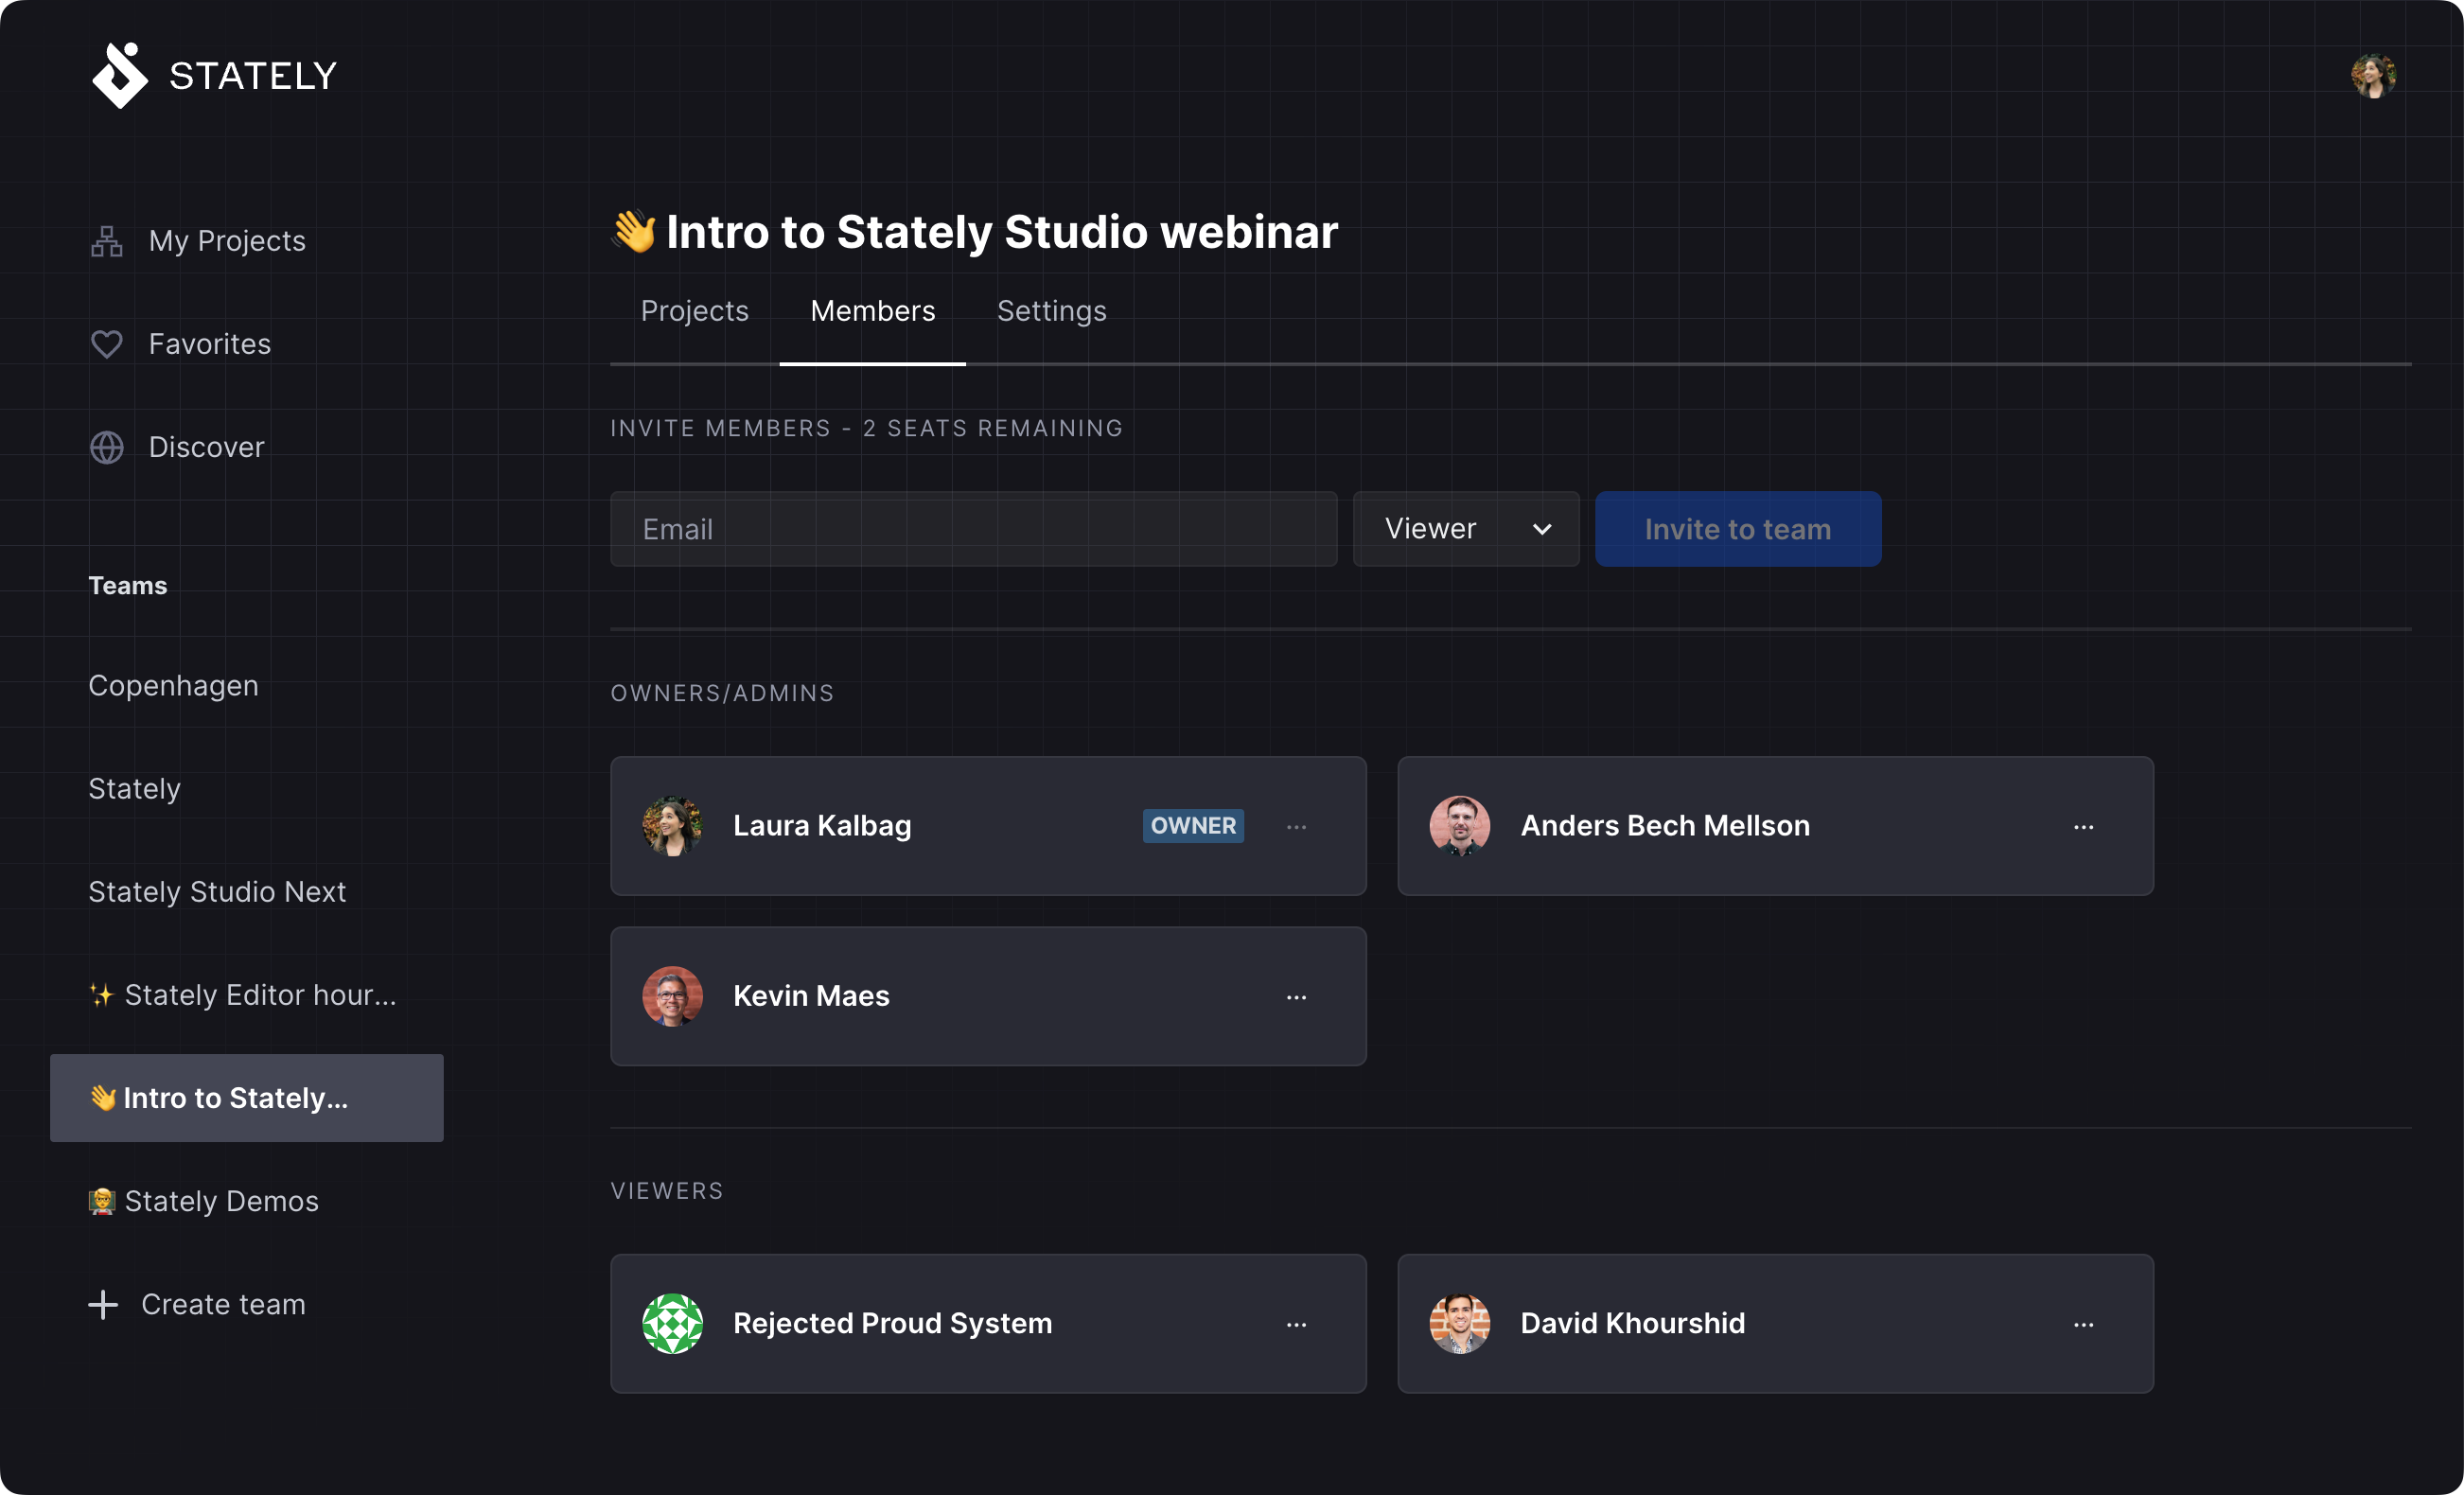 Stately Studio Team page for the Intro to Stately Studio webinar team, showing Laura Kalbag with the owner and Admin role, Anders Bech Mellson and Kevin Maes with Admin roles, and Rejected Proud System and David Khourshid with Viewer roles.